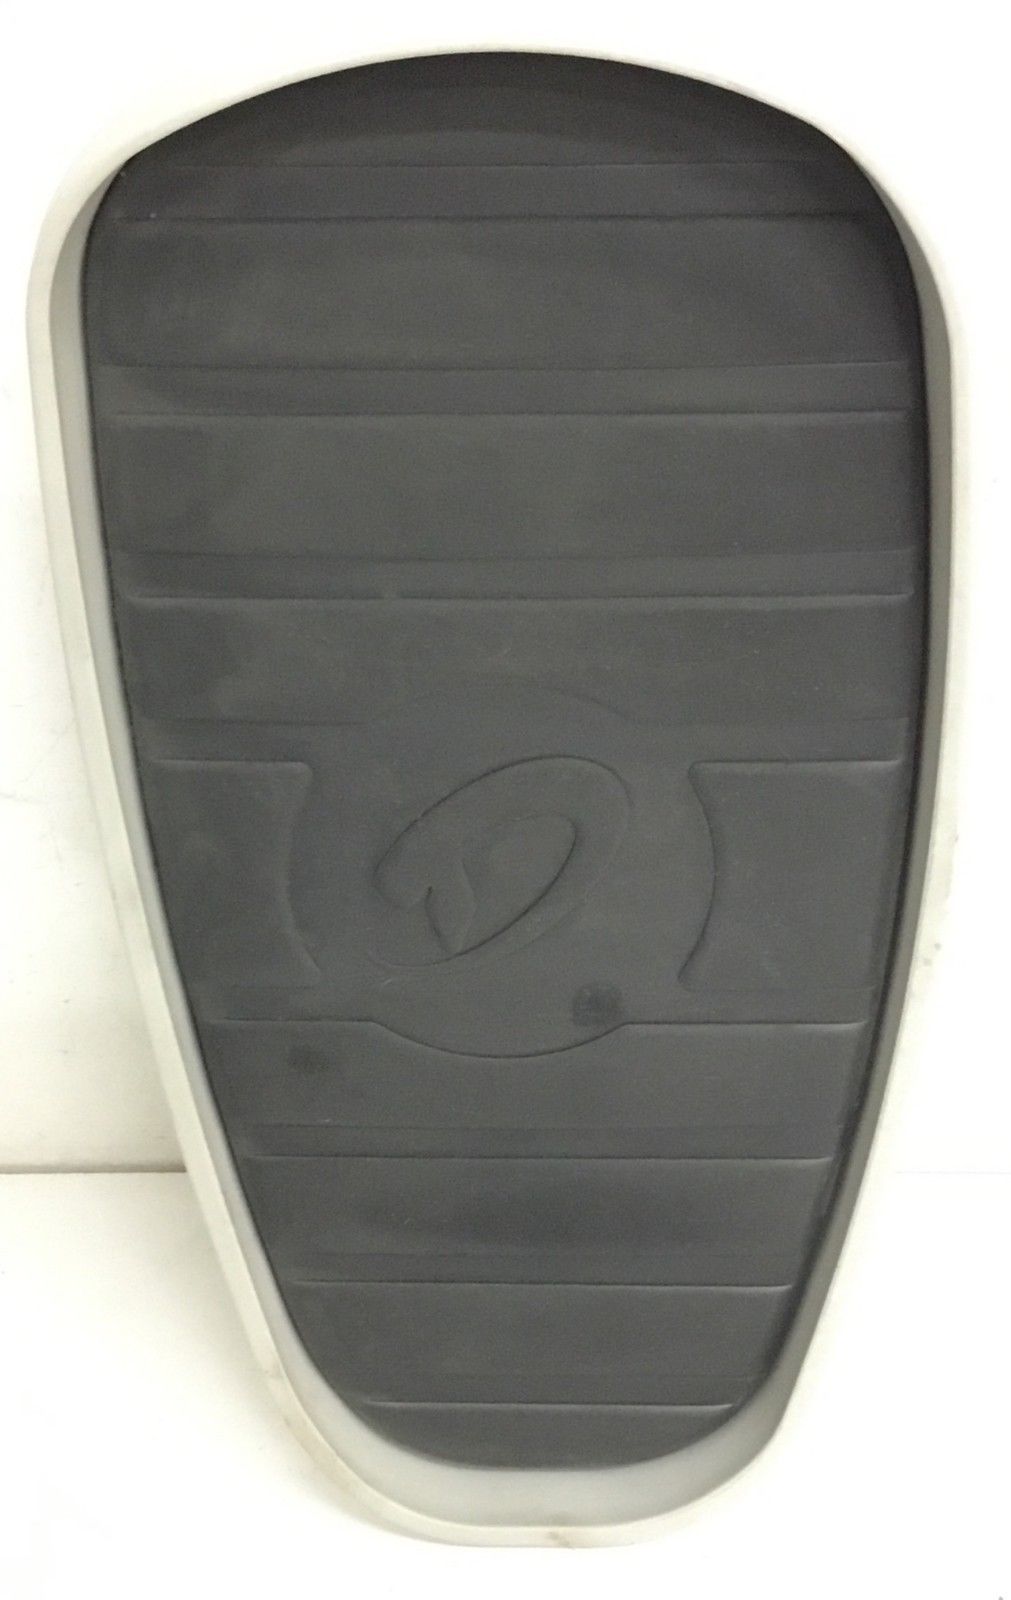 Right Foot Pedal Pad (Used)